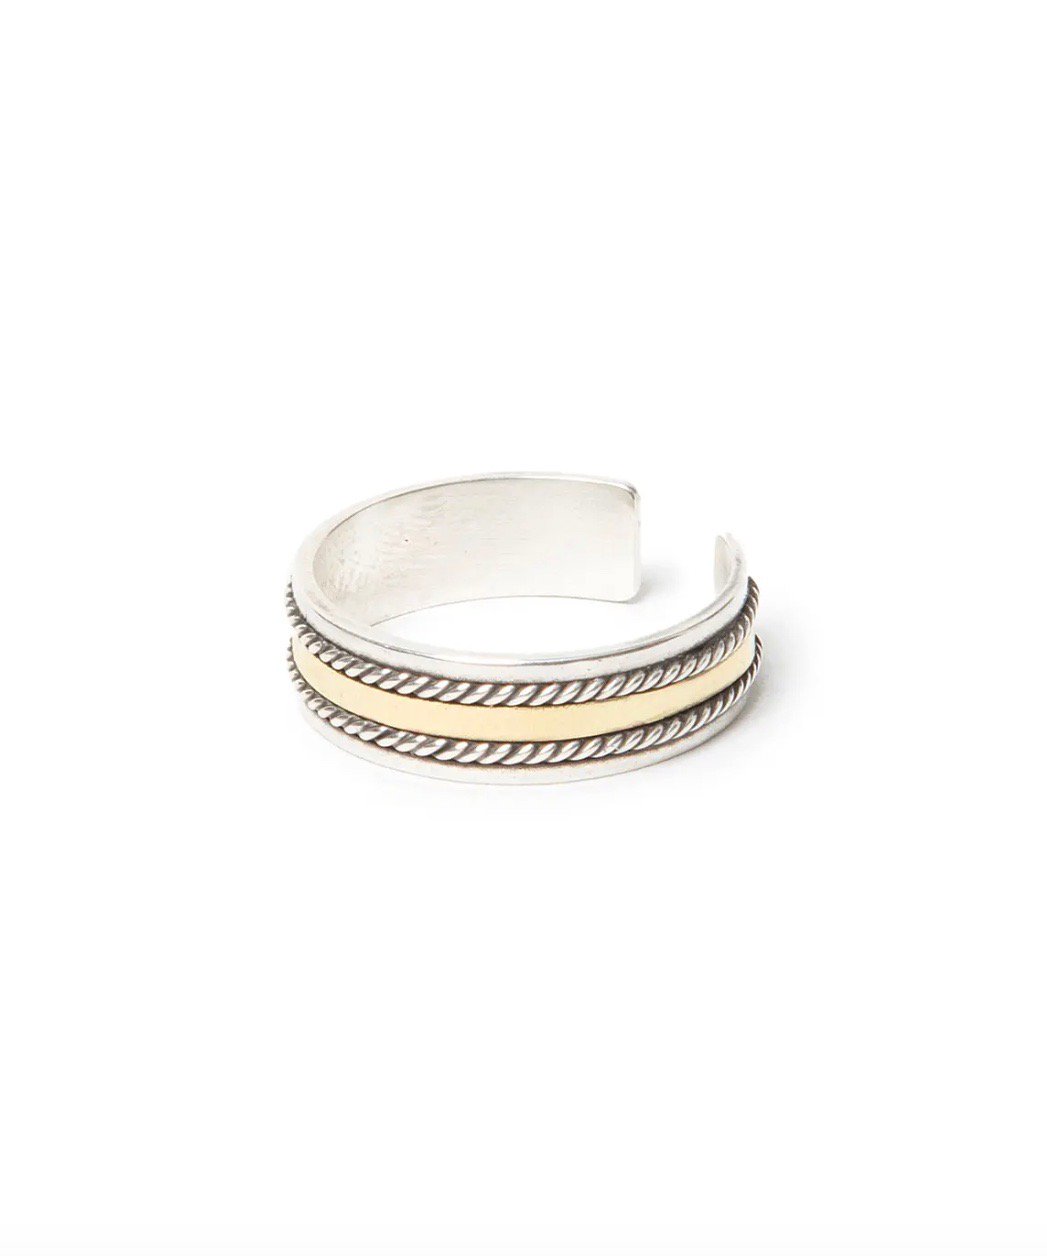 HOBO / ROPE RING 925 SILVER with BRASS